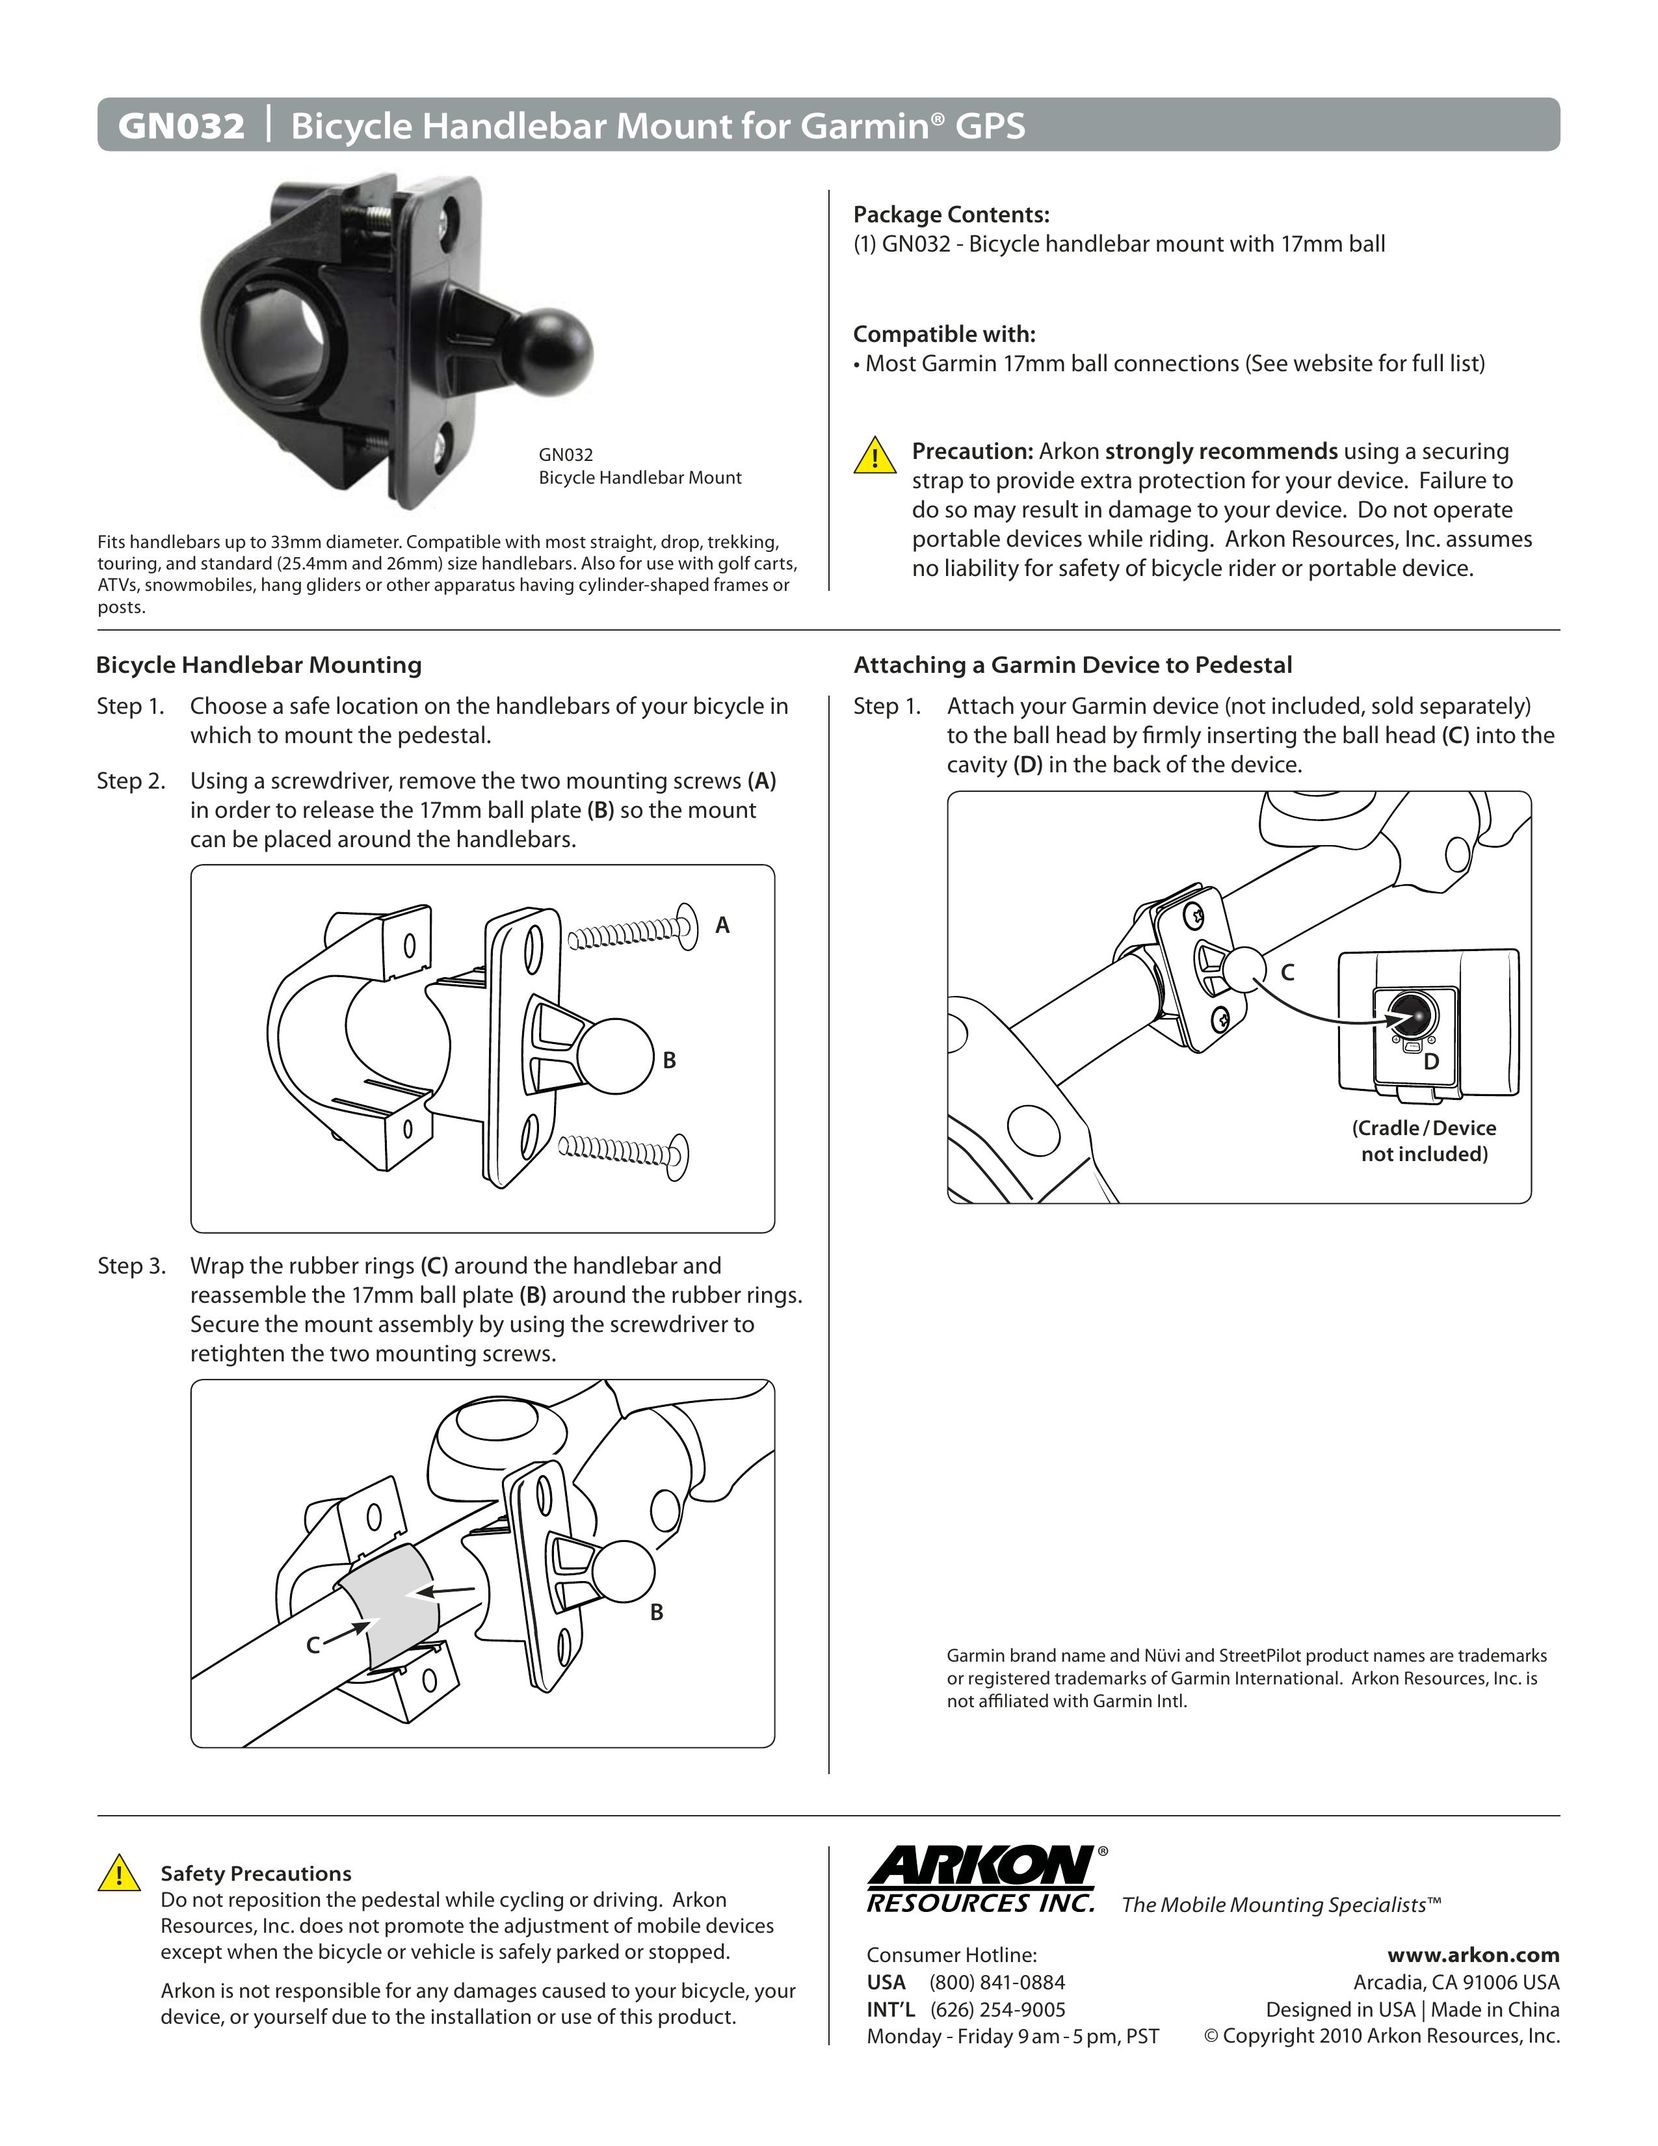 Black & Decker GN032 Bicycle Accessories User Manual